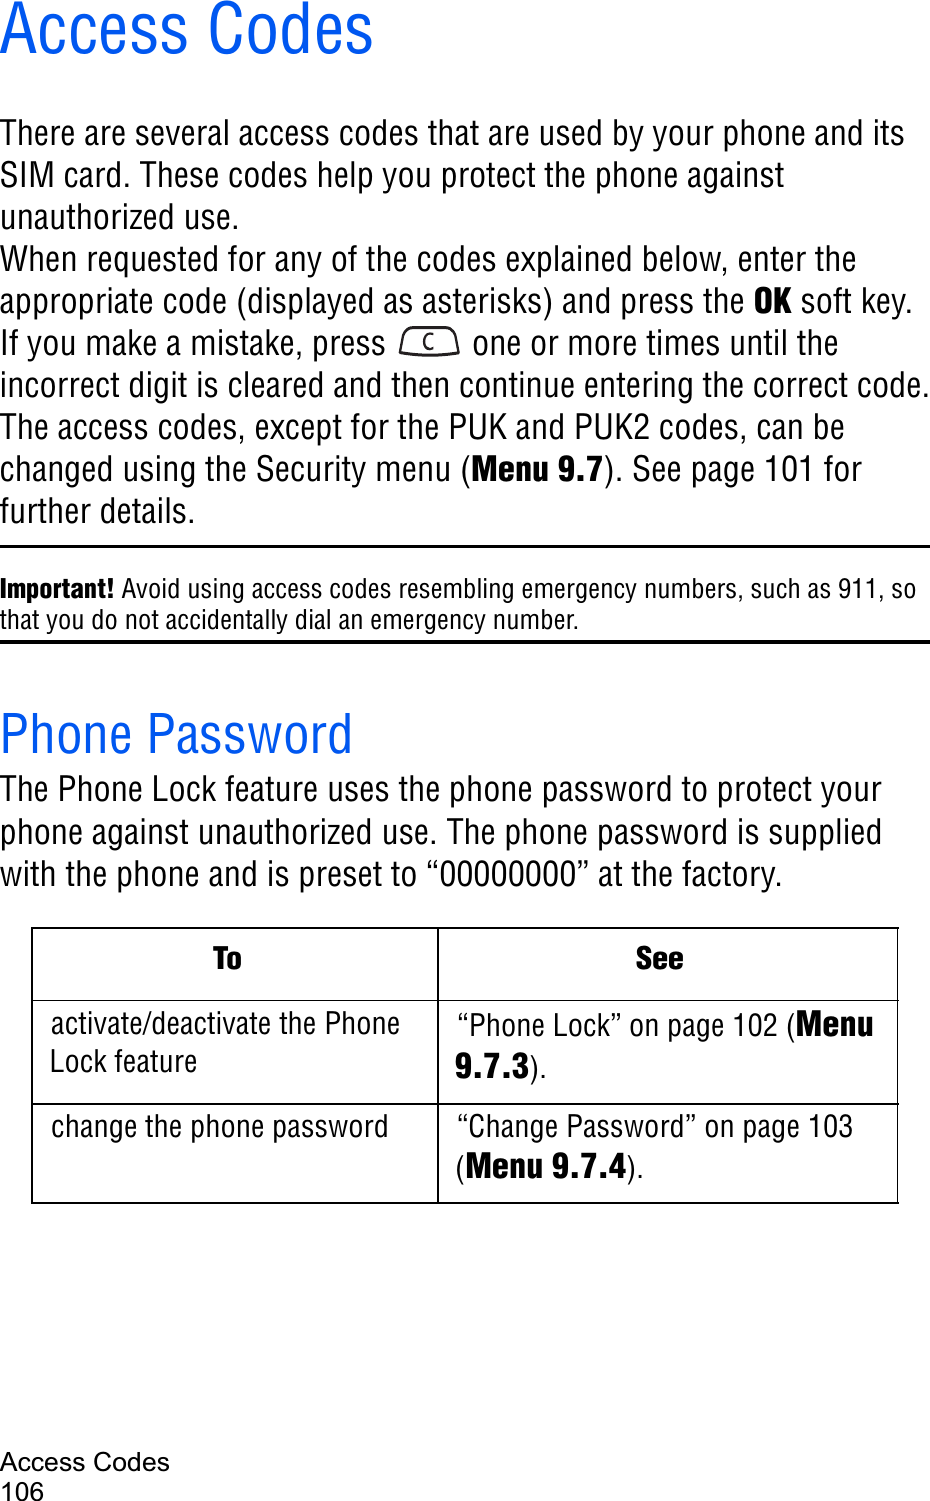 Access Codes106Access CodesThere are several access codes that are used by your phone and its SIM card. These codes help you protect the phone against unauthorized use.When requested for any of the codes explained below, enter the appropriate code (displayed as asterisks) and press the OK soft key. If you make a mistake, press   one or more times until the incorrect digit is cleared and then continue entering the correct code.The access codes, except for the PUK and PUK2 codes, can be changed using the Security menu (Menu 9.7). See page 101 for further details.Important! Avoid using access codes resembling emergency numbers, such as 911, so that you do not accidentally dial an emergency number.Phone PasswordThe Phone Lock feature uses the phone password to protect your phone against unauthorized use. The phone password is supplied with the phone and is preset to “00000000” at the factory.To Seeactivate/deactivate the Phone Lock feature“Phone Lock” on page 102 (Menu9.7.3).change the phone password “Change Password” on page 103 (Menu 9.7.4).